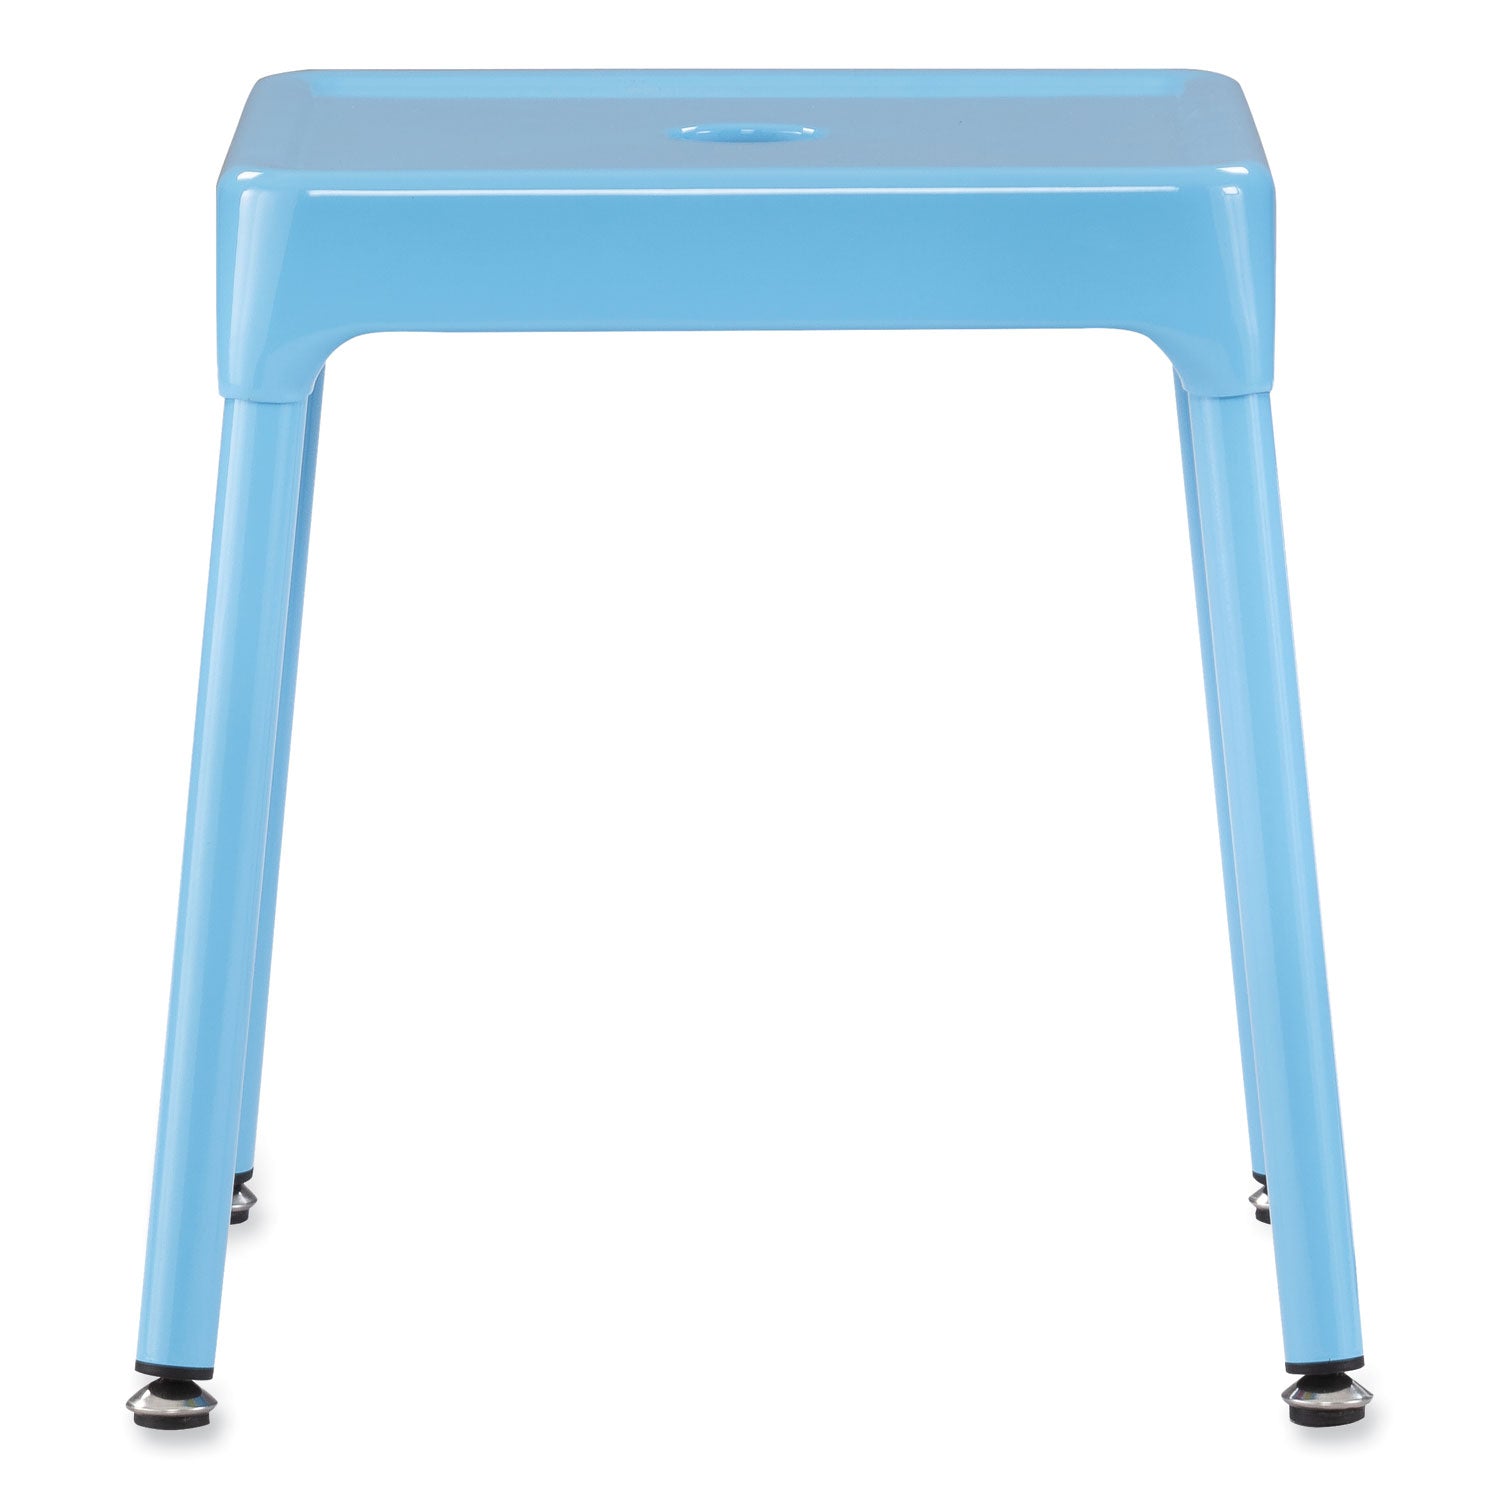 steel-guest-stool-backless-supports-up-to-275-lb-15-to-155-seat-height-baby-blueseat-base-ships-in-1-3-business-days_saf6603bu - 2